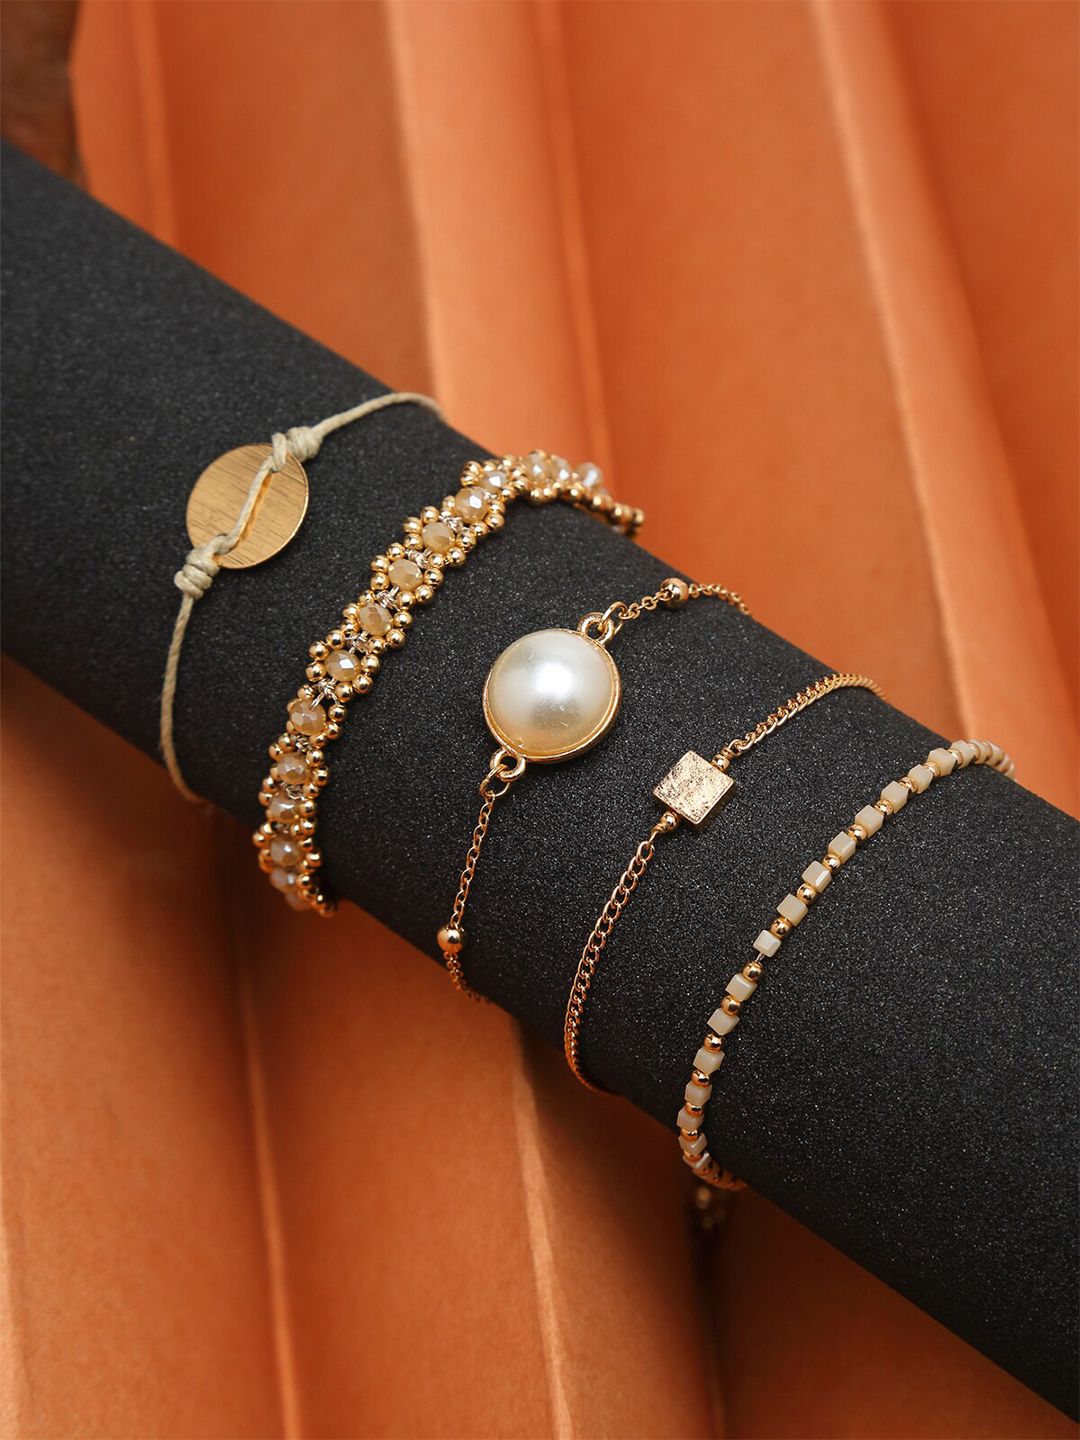 Madame Women 5 Rose Gold & White Pearls Rose Gold-Plated Charm Bracelet Price in India